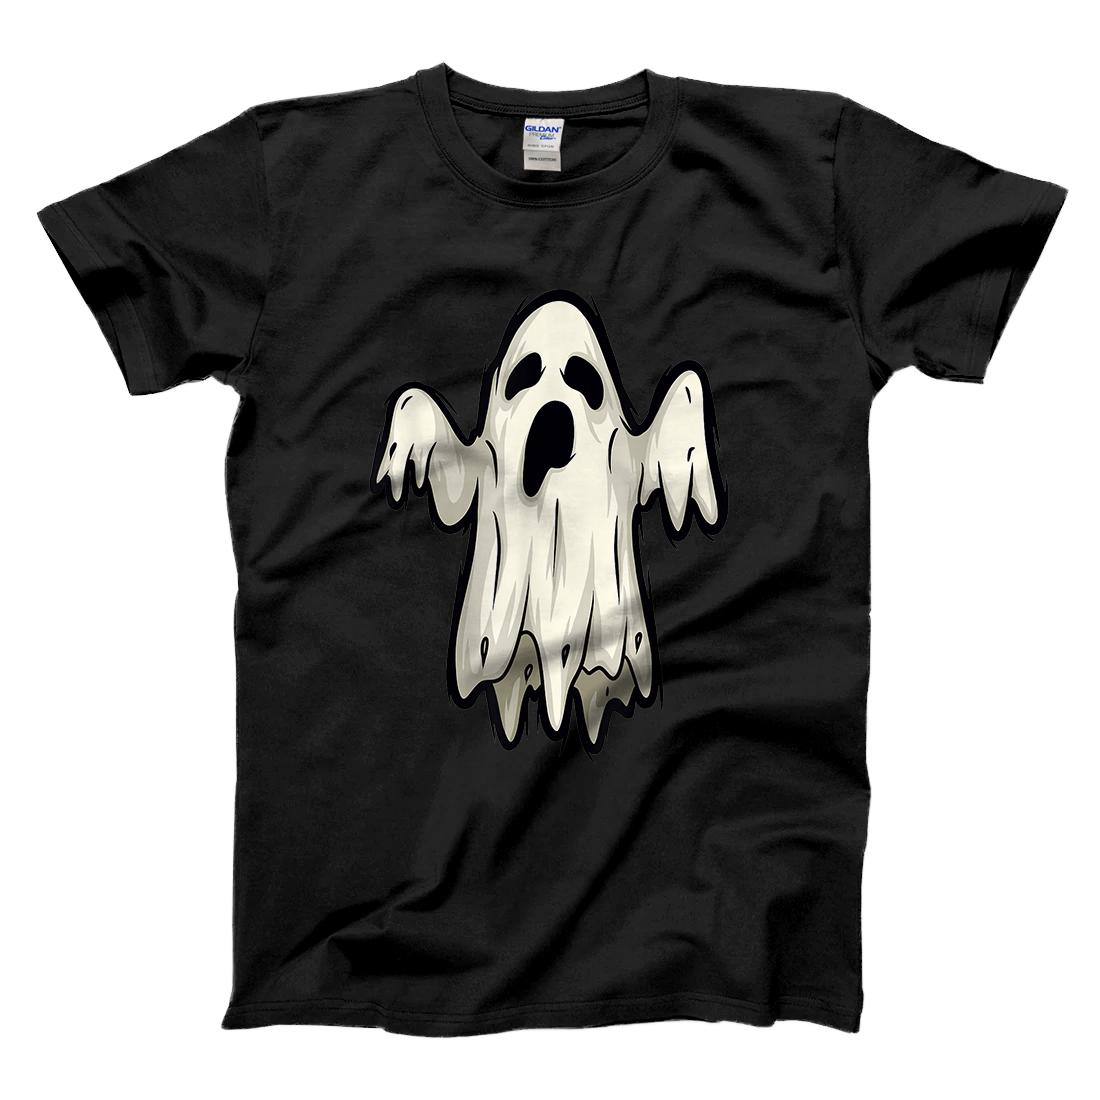 Personalized Ghost Halloween Costume - Funny Ghost for Halloween T-Shirt